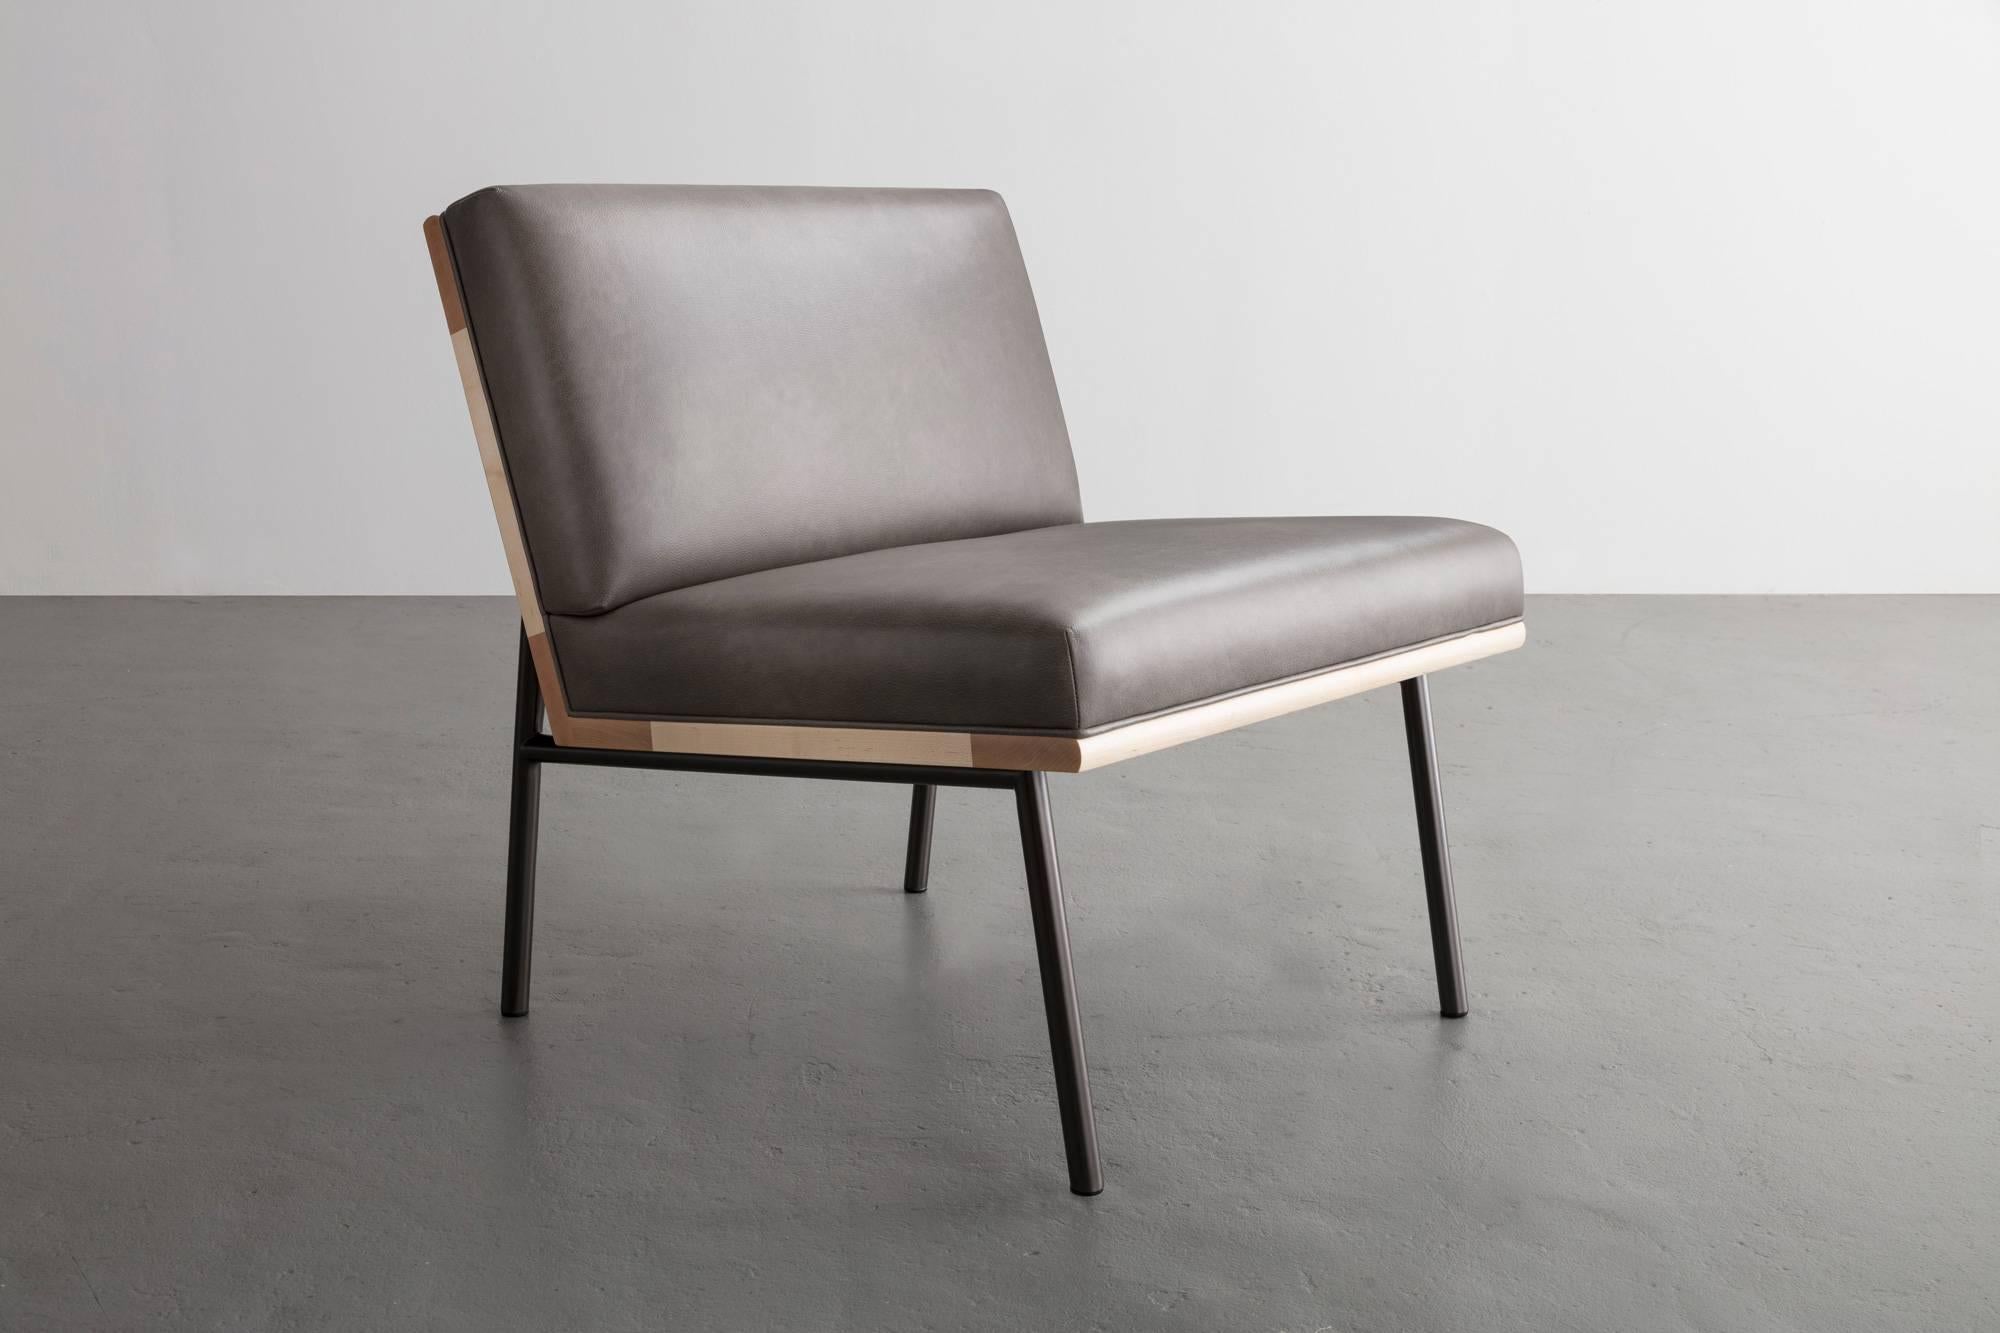 Thoughtful consideration in materials and transitions make this chair a skillful edit and perfect balance.
 
Seat frame shown in maple and available in ash, walnut, and  white oak. 
Steel legs shown in black nickel plated or available in powder coat